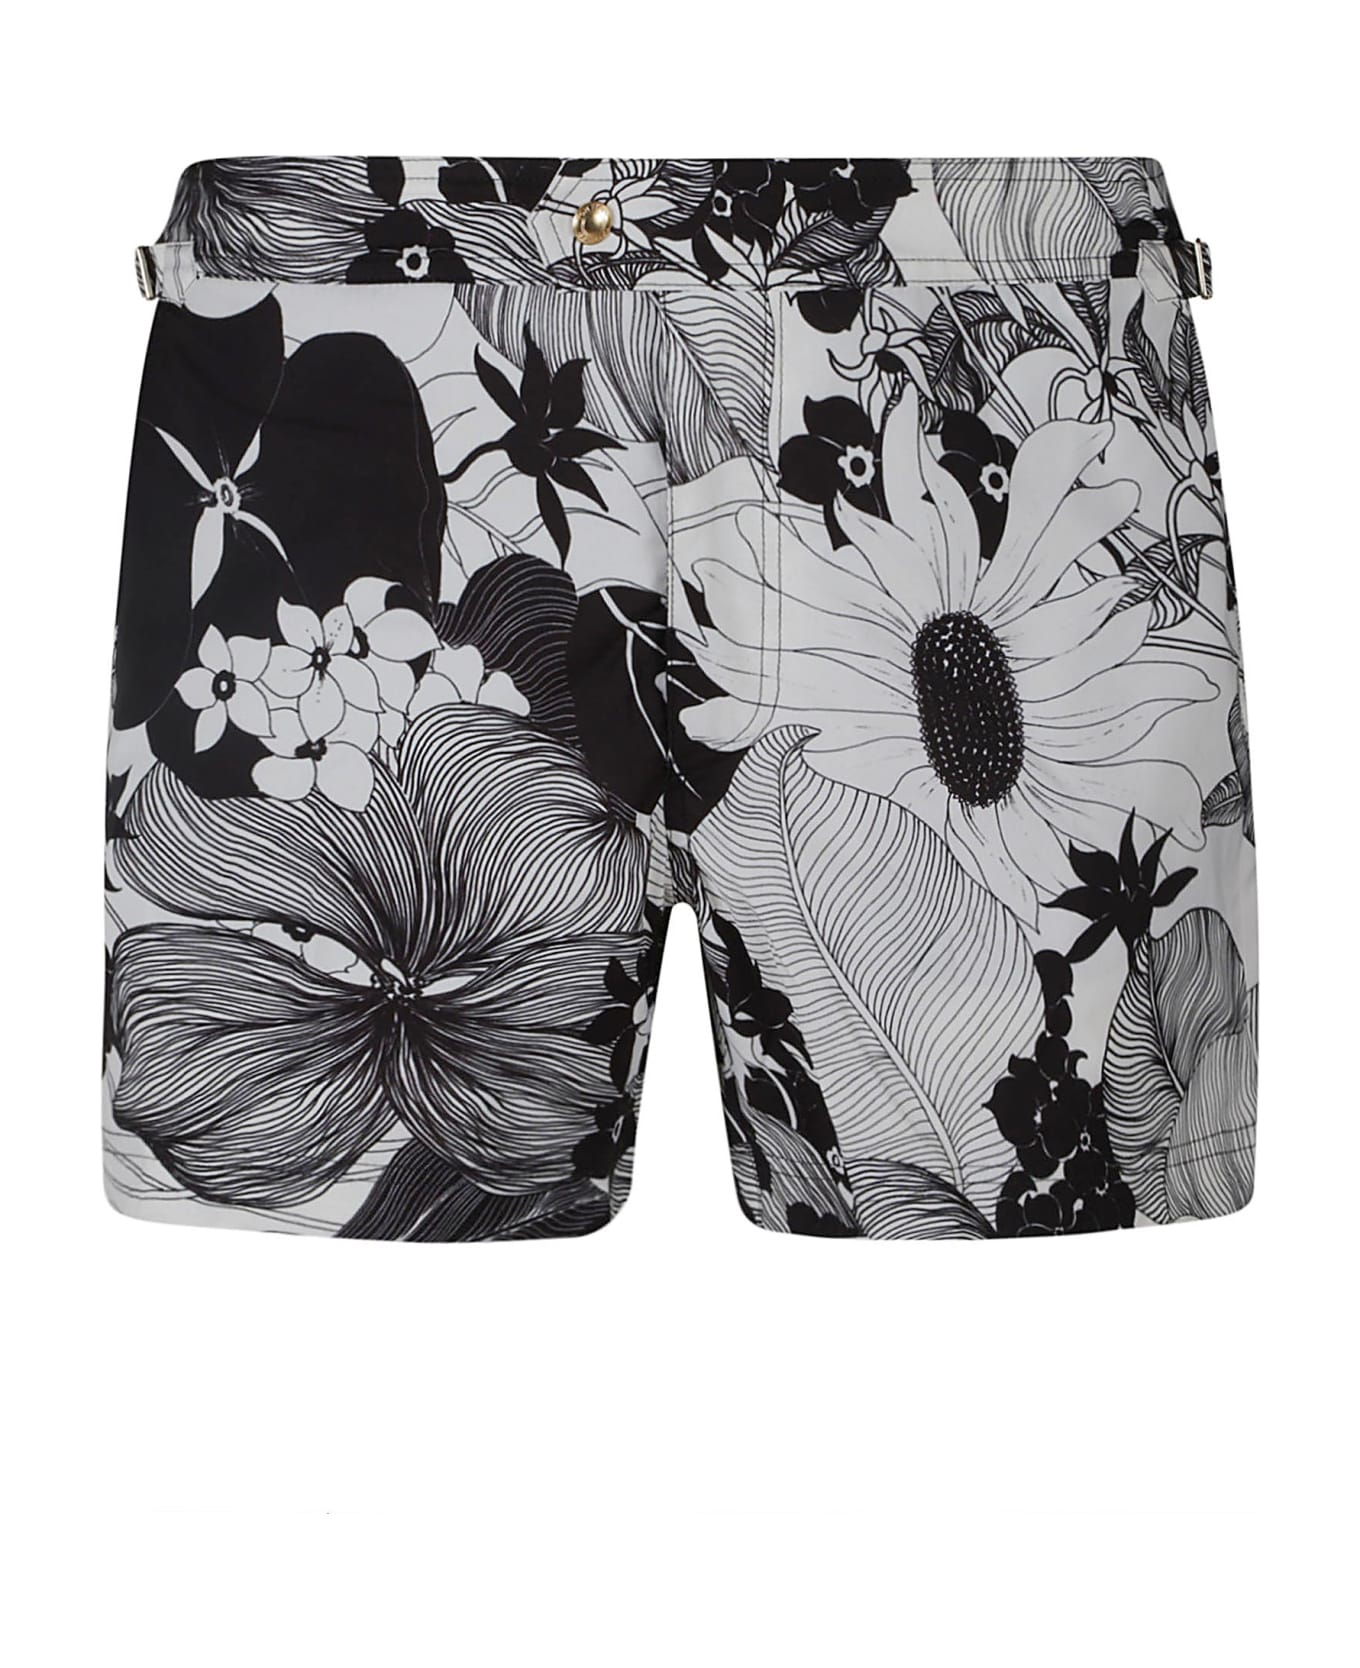 Tom Ford Floral Printed Shorts - Combo Black